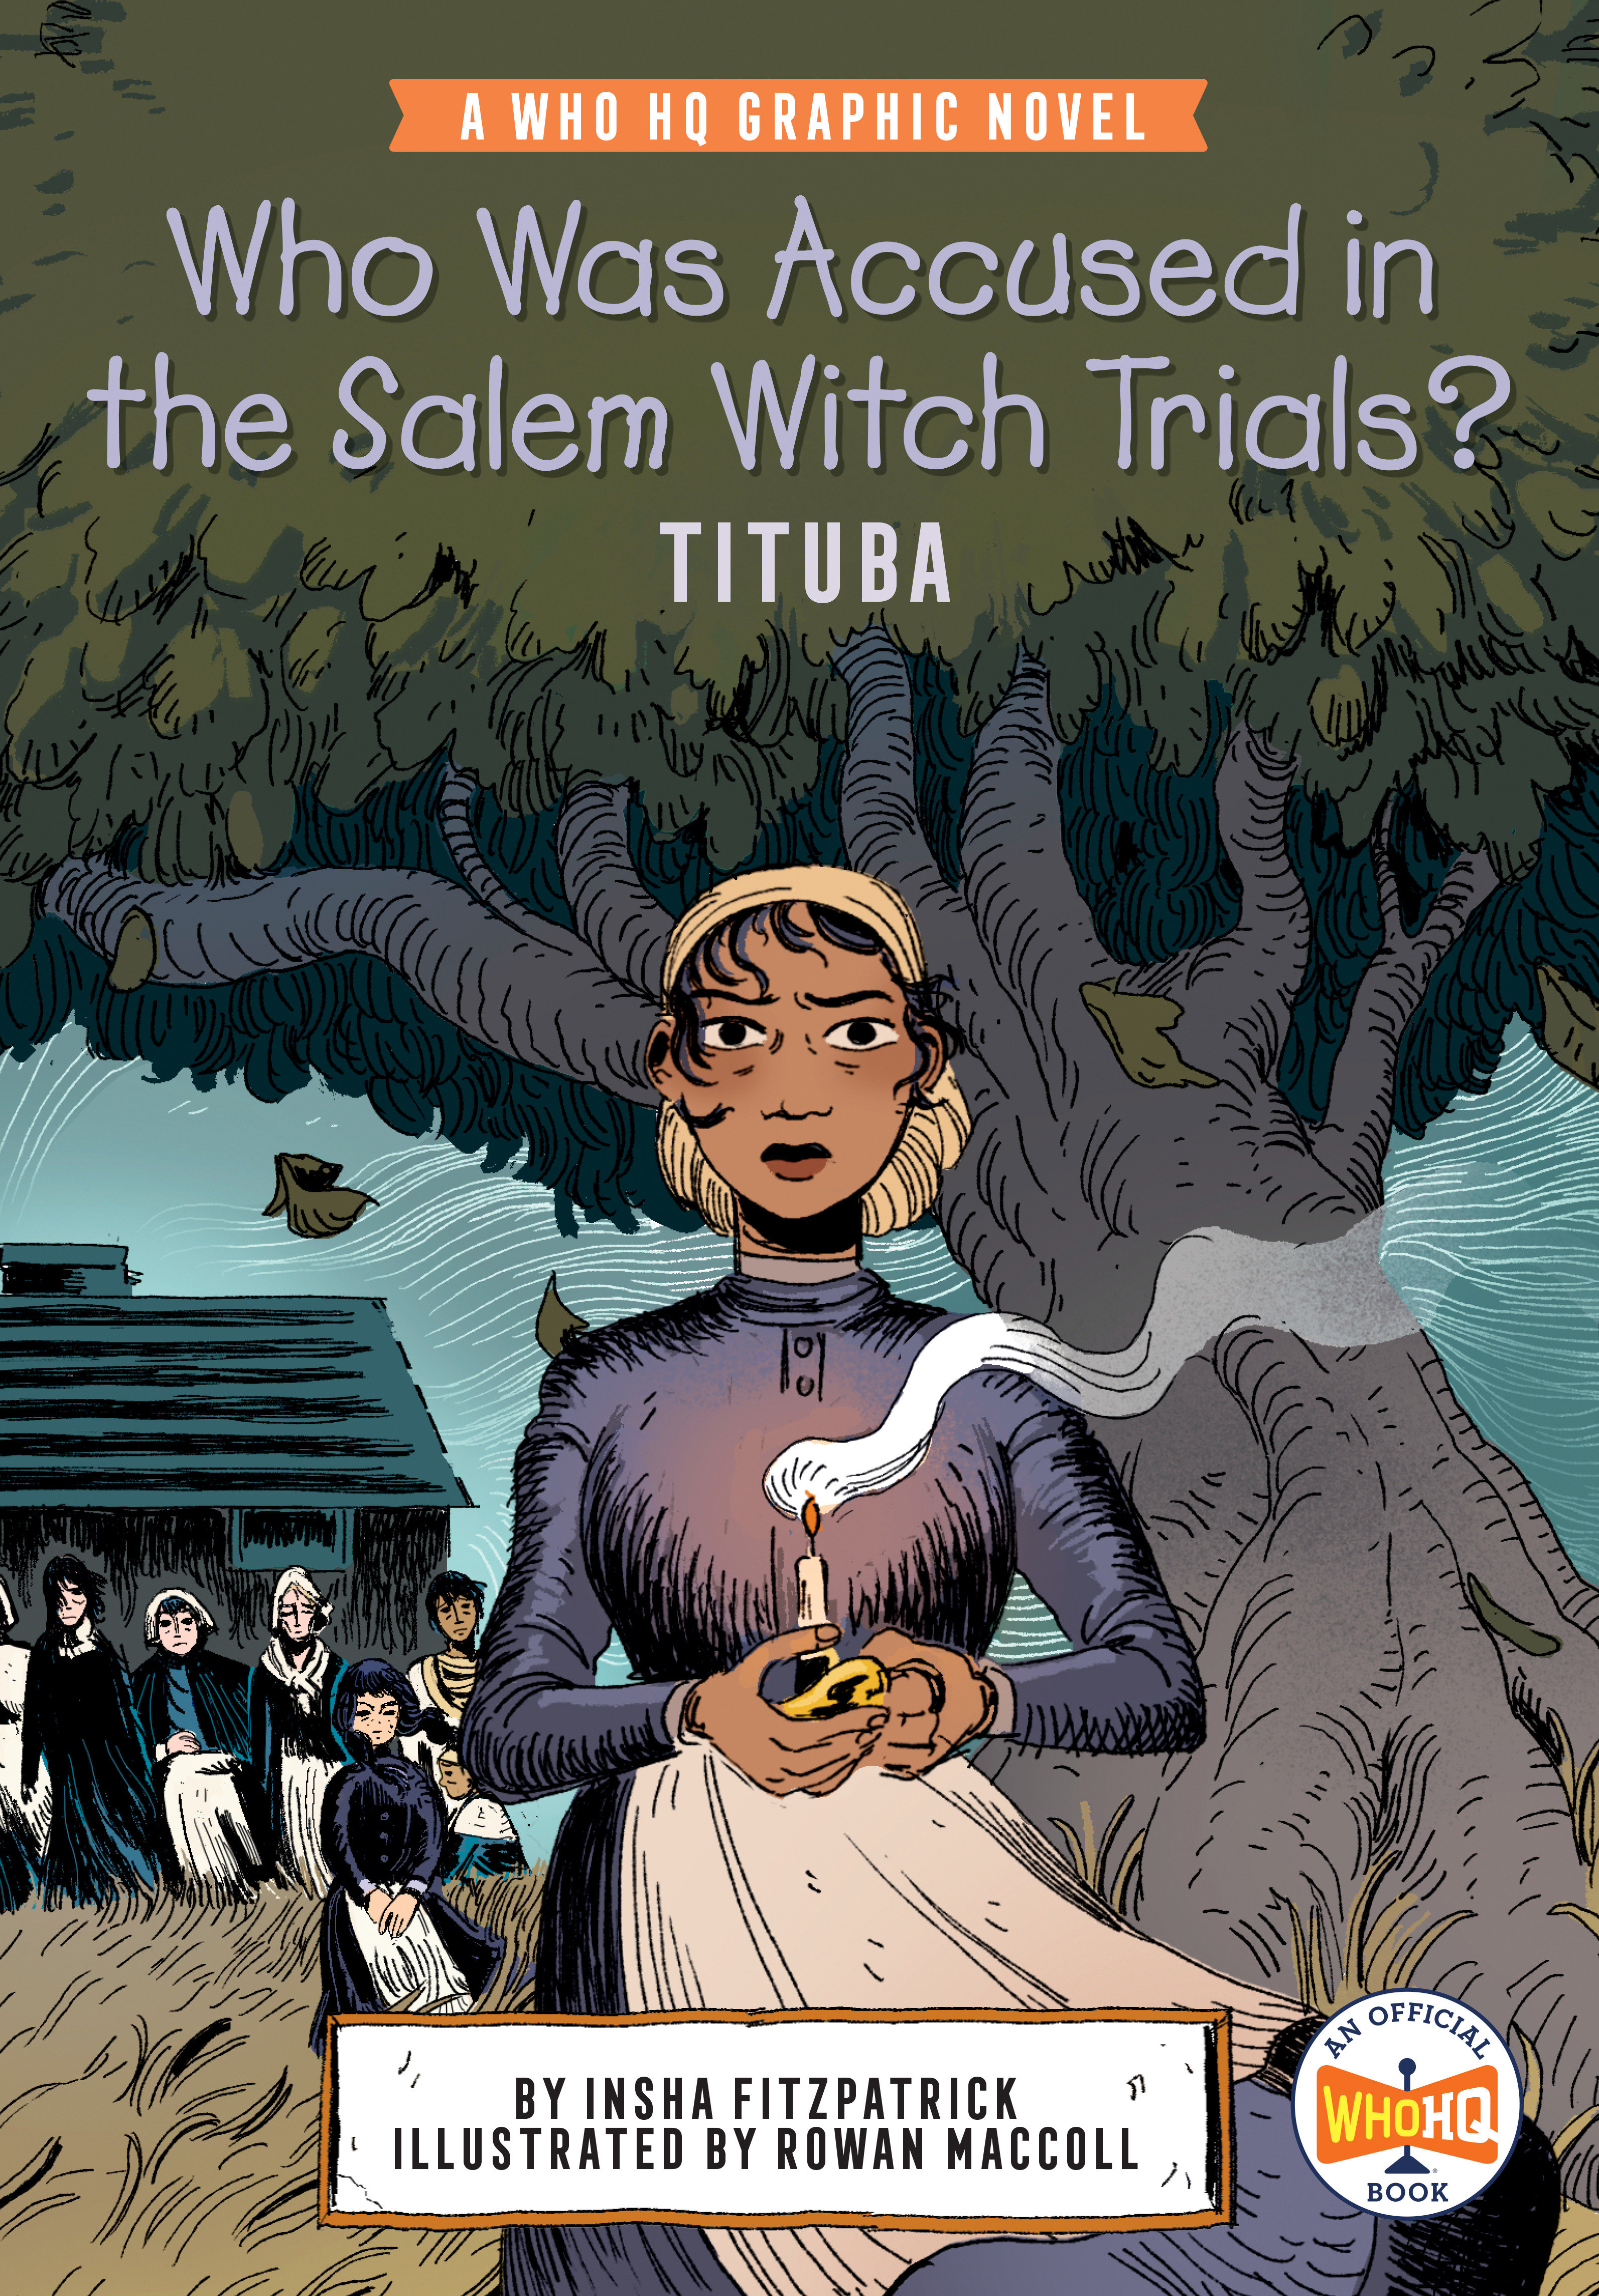 Who HQ Hardcover Volume 4 Who Was Accused in the Salem Witch Trials?: Tituba